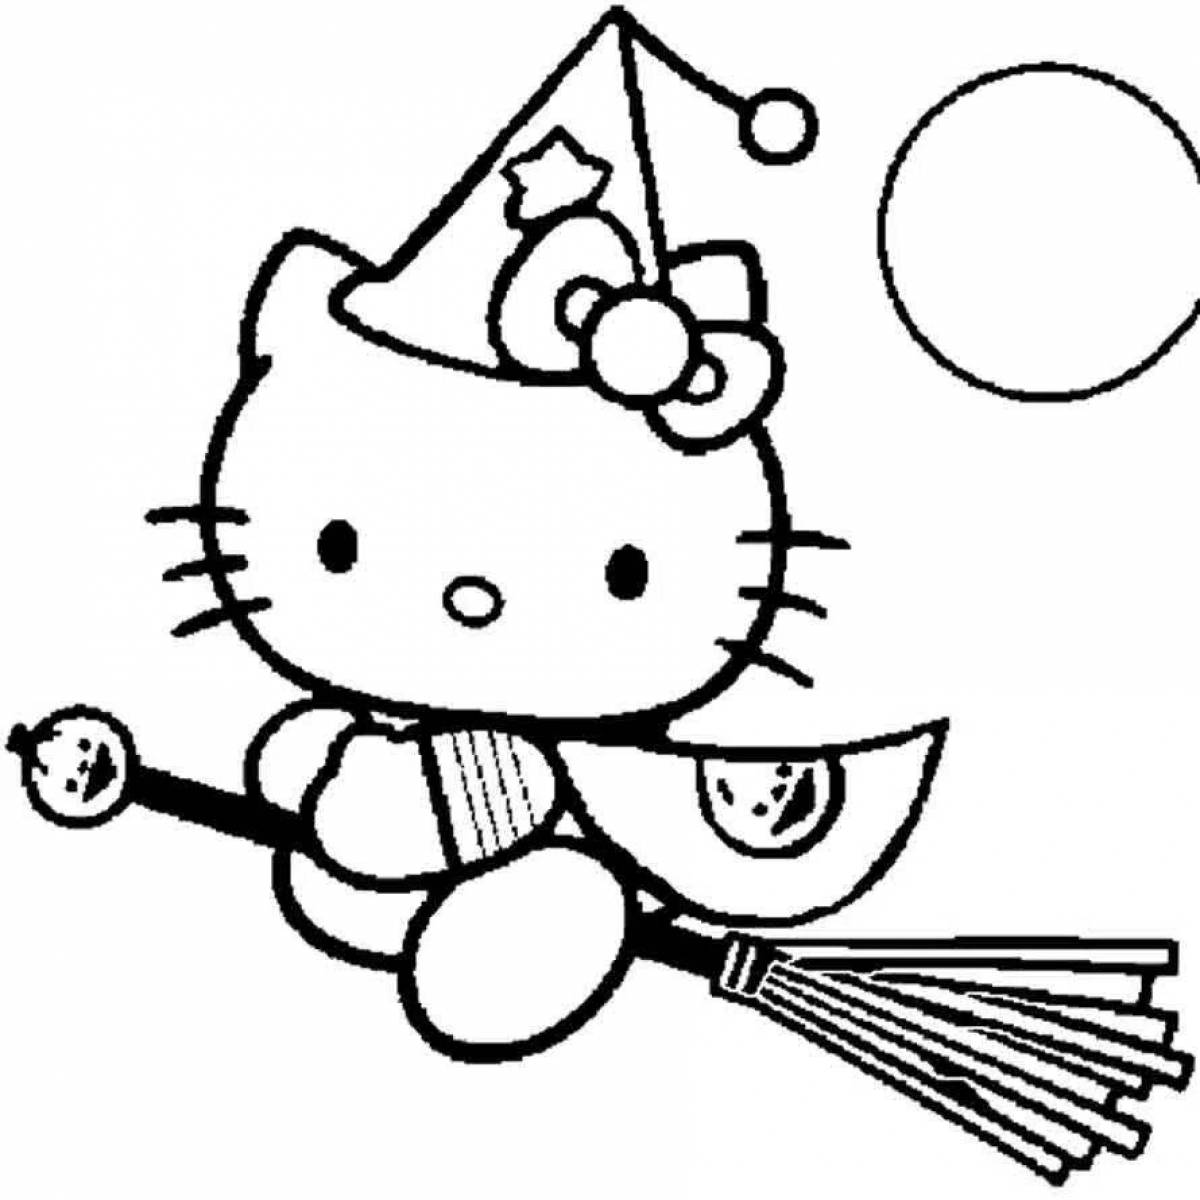 Chilling halloween kitty coloring page